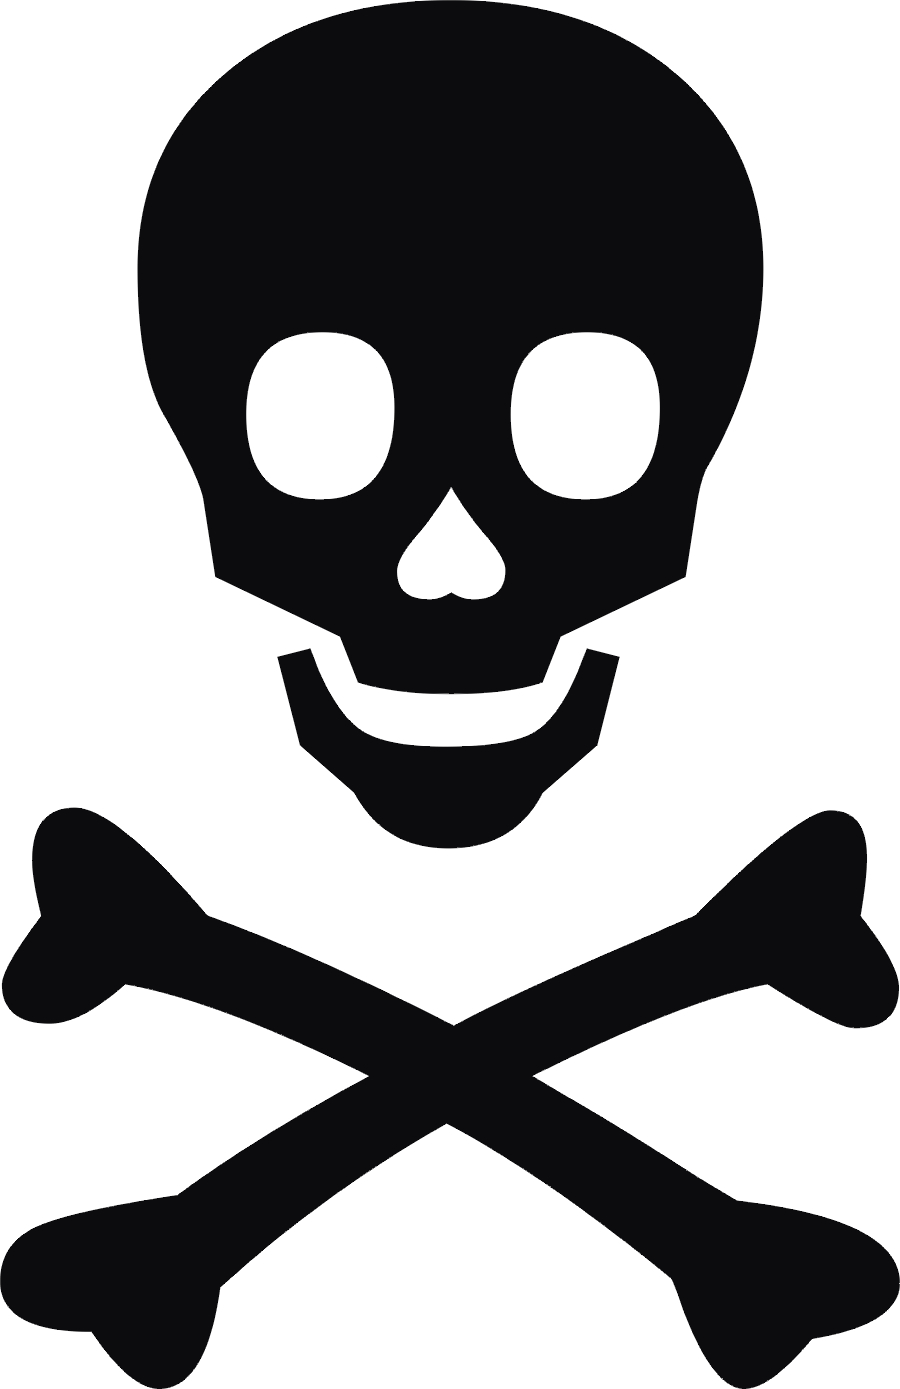 free-skull-and-crossbones-image-download-free-skull-and-crossbones-image-png-images-free